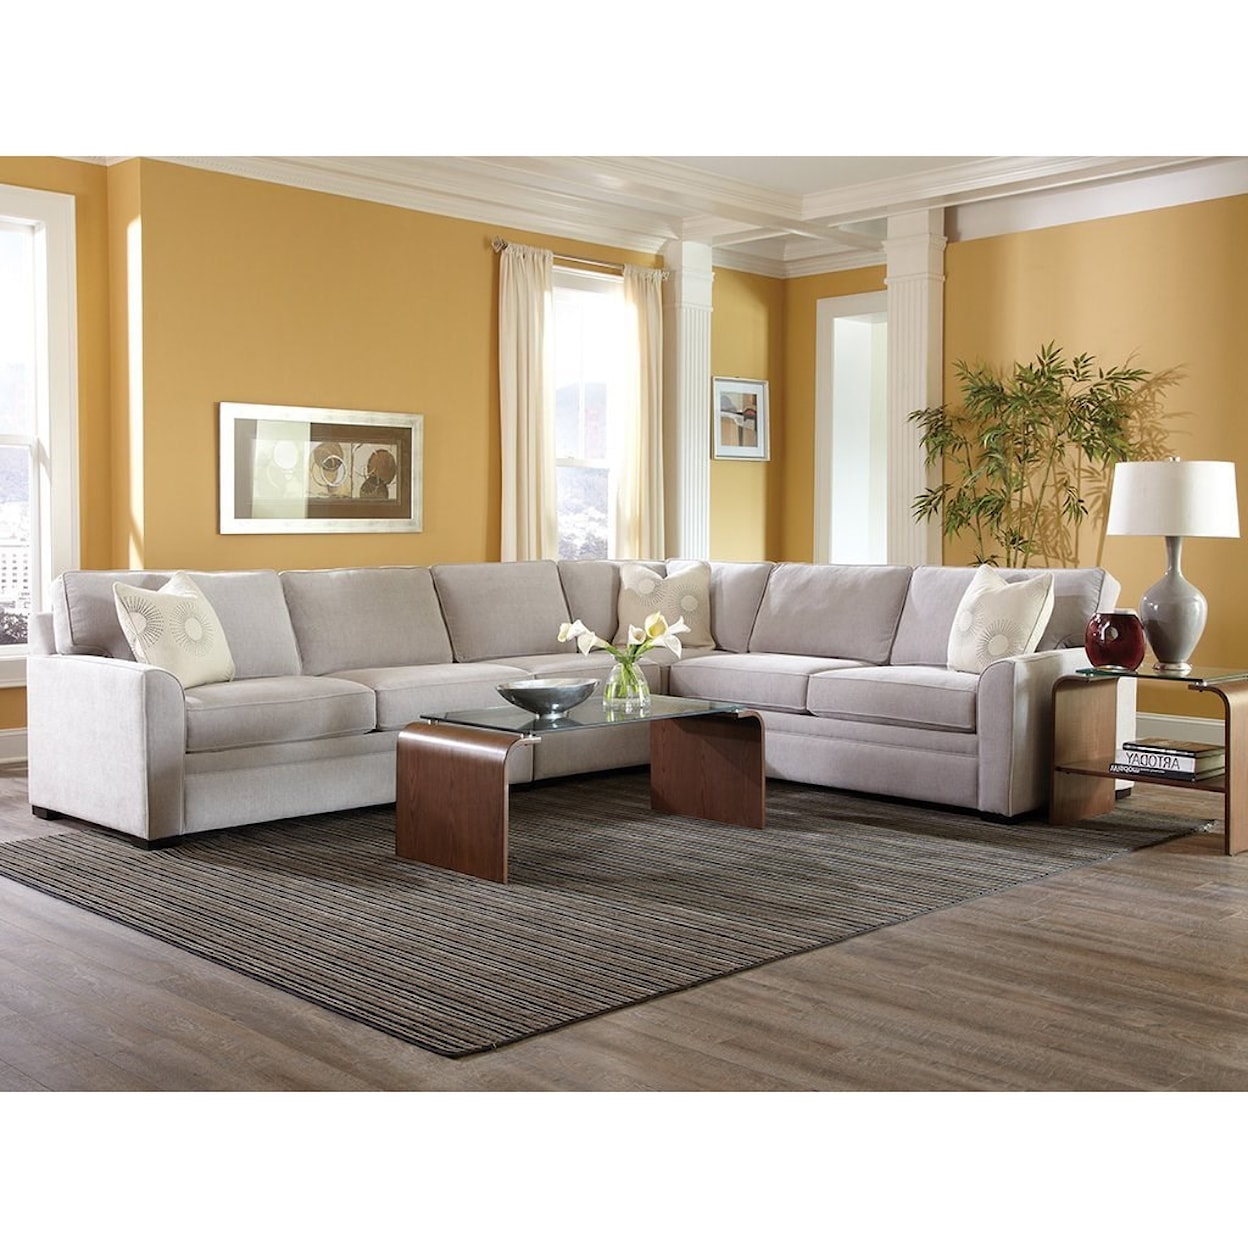 Jonathan Louis Blissful 5-Seat Sectional w/ LAF Pillow Top Sleeper